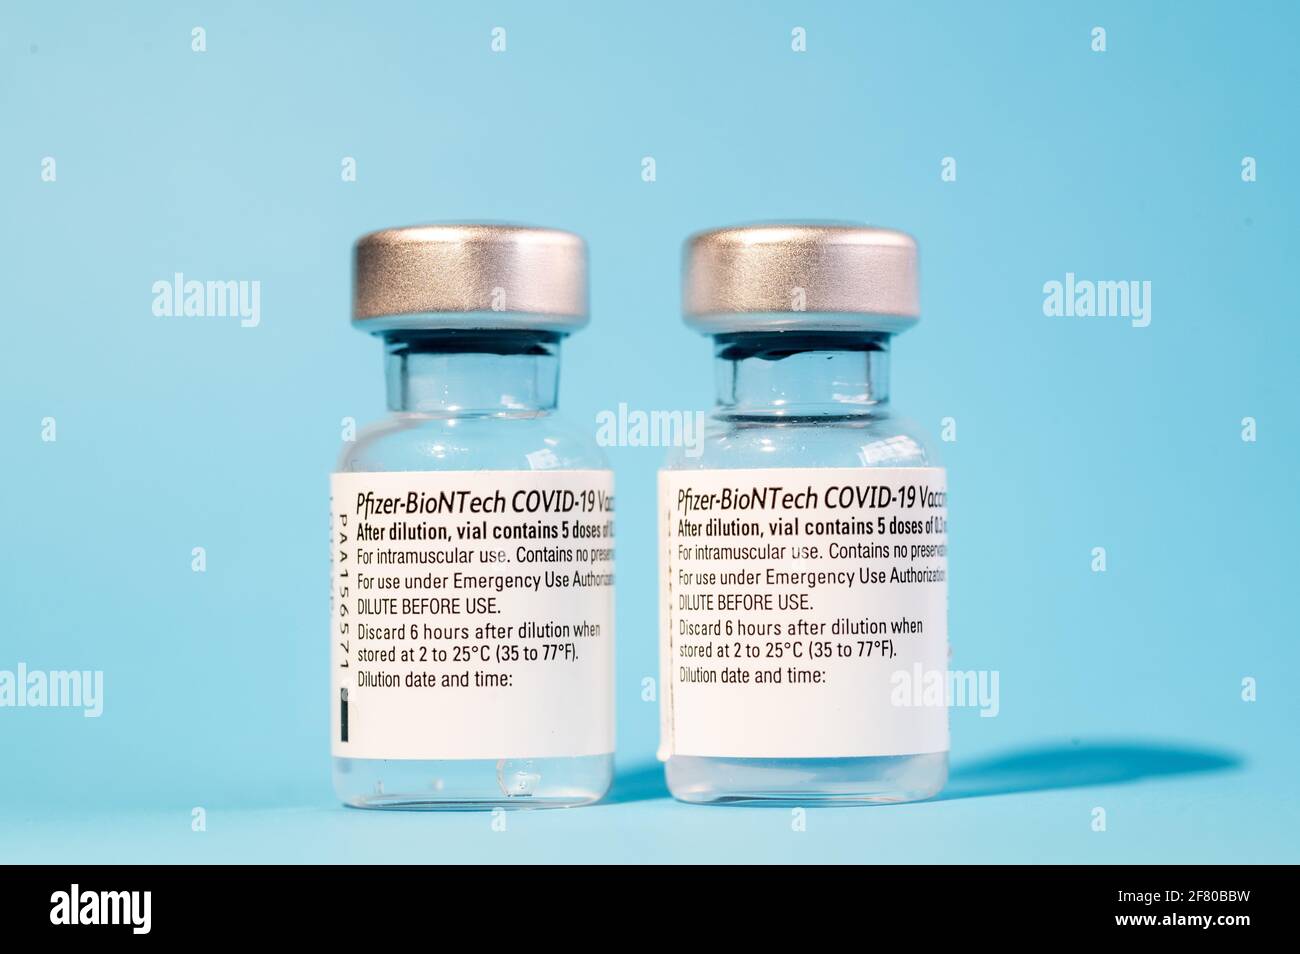 Vials of Pfizer - BioNTech vaccines for coronavirus (COVID-19) treatment. Spain this week received a new shipment of 1.2 million doses of the vaccine Stock Photo